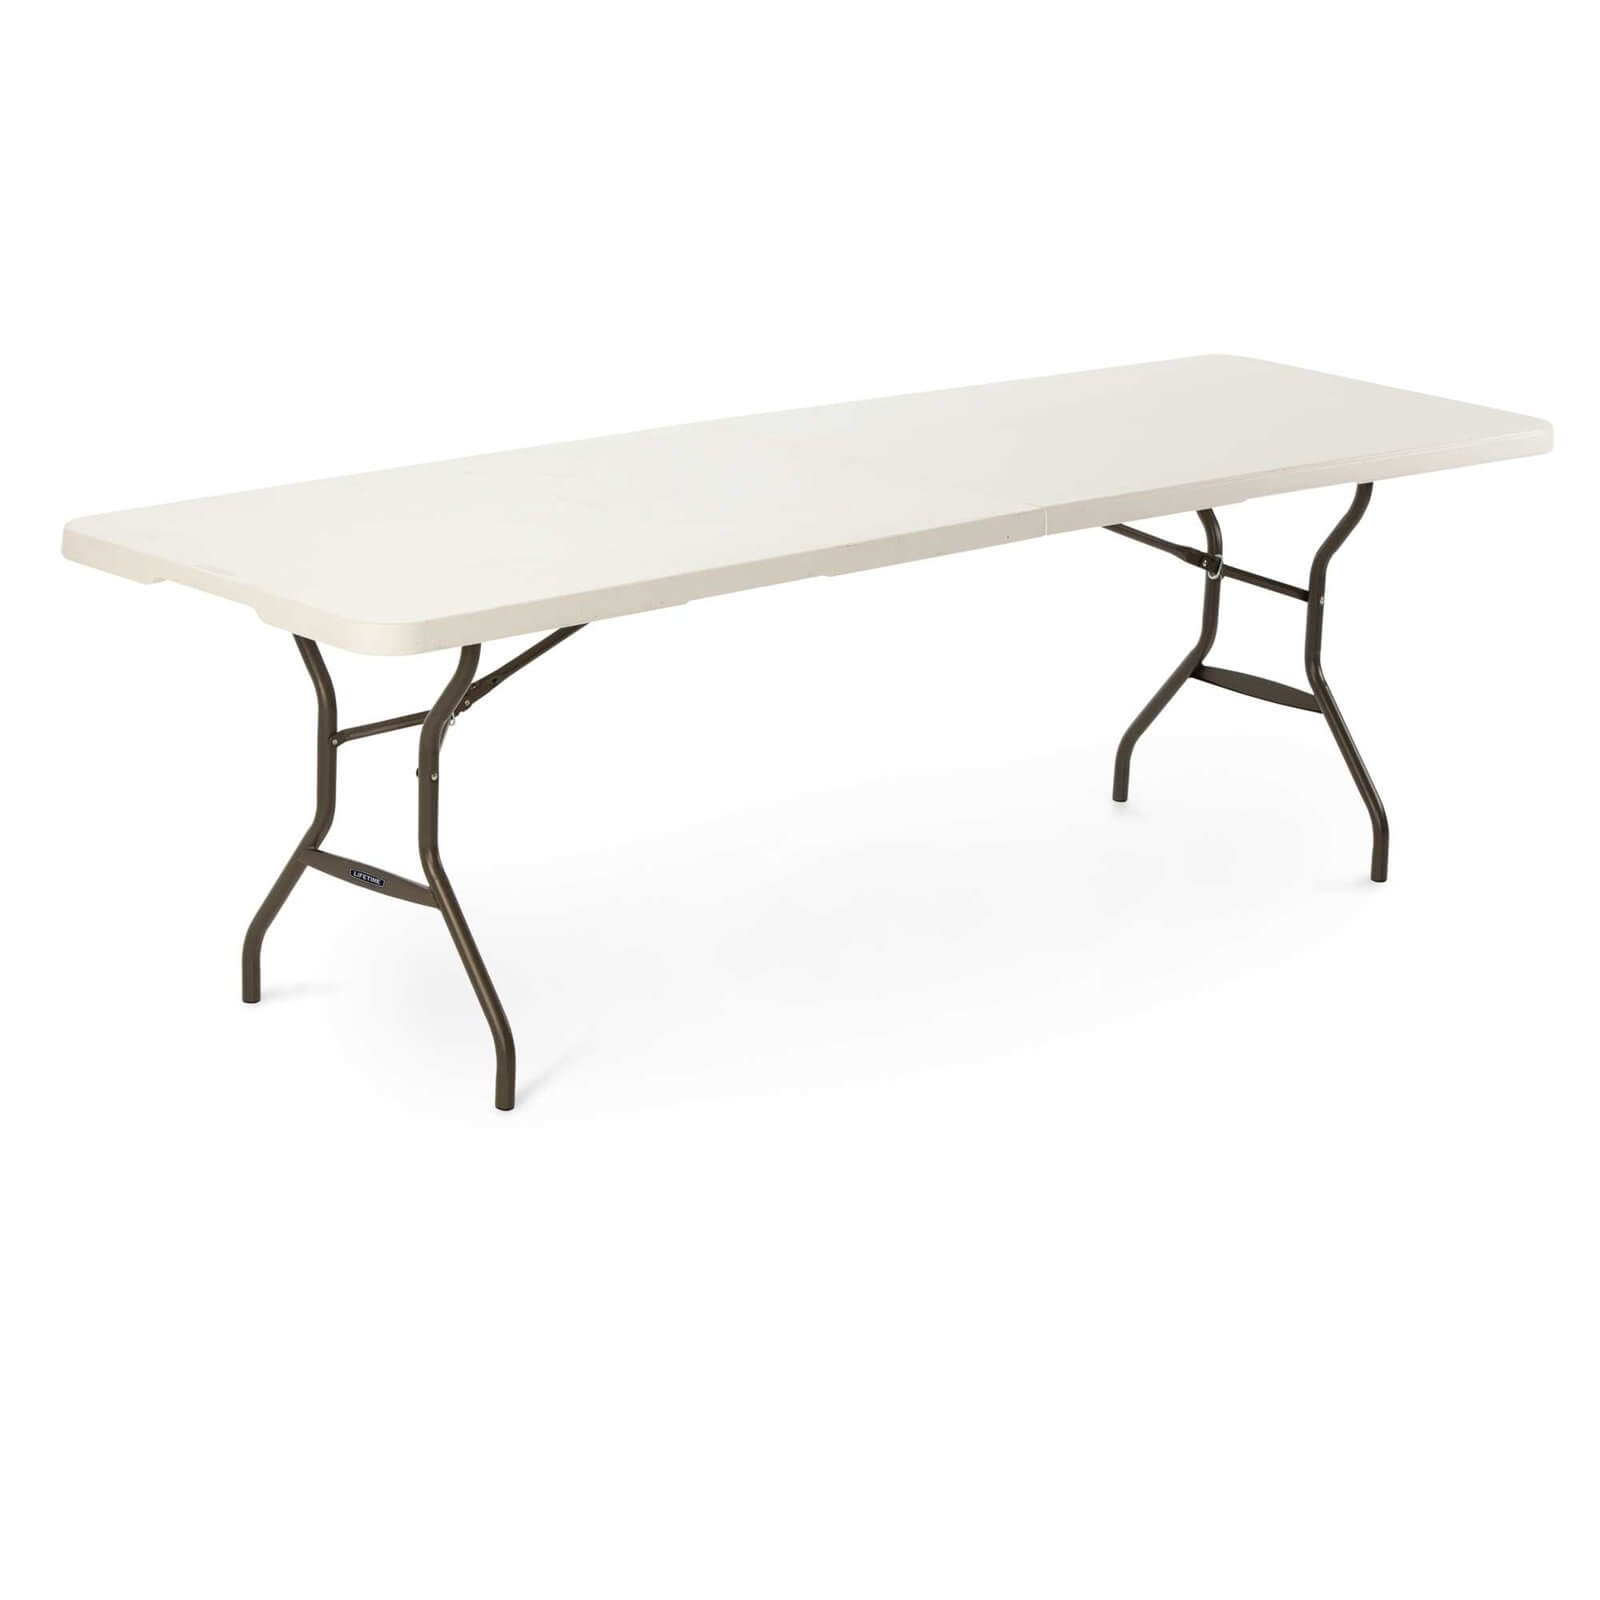 Lifetime 8-Foot Fold-In-Half Table (Light Commercial)